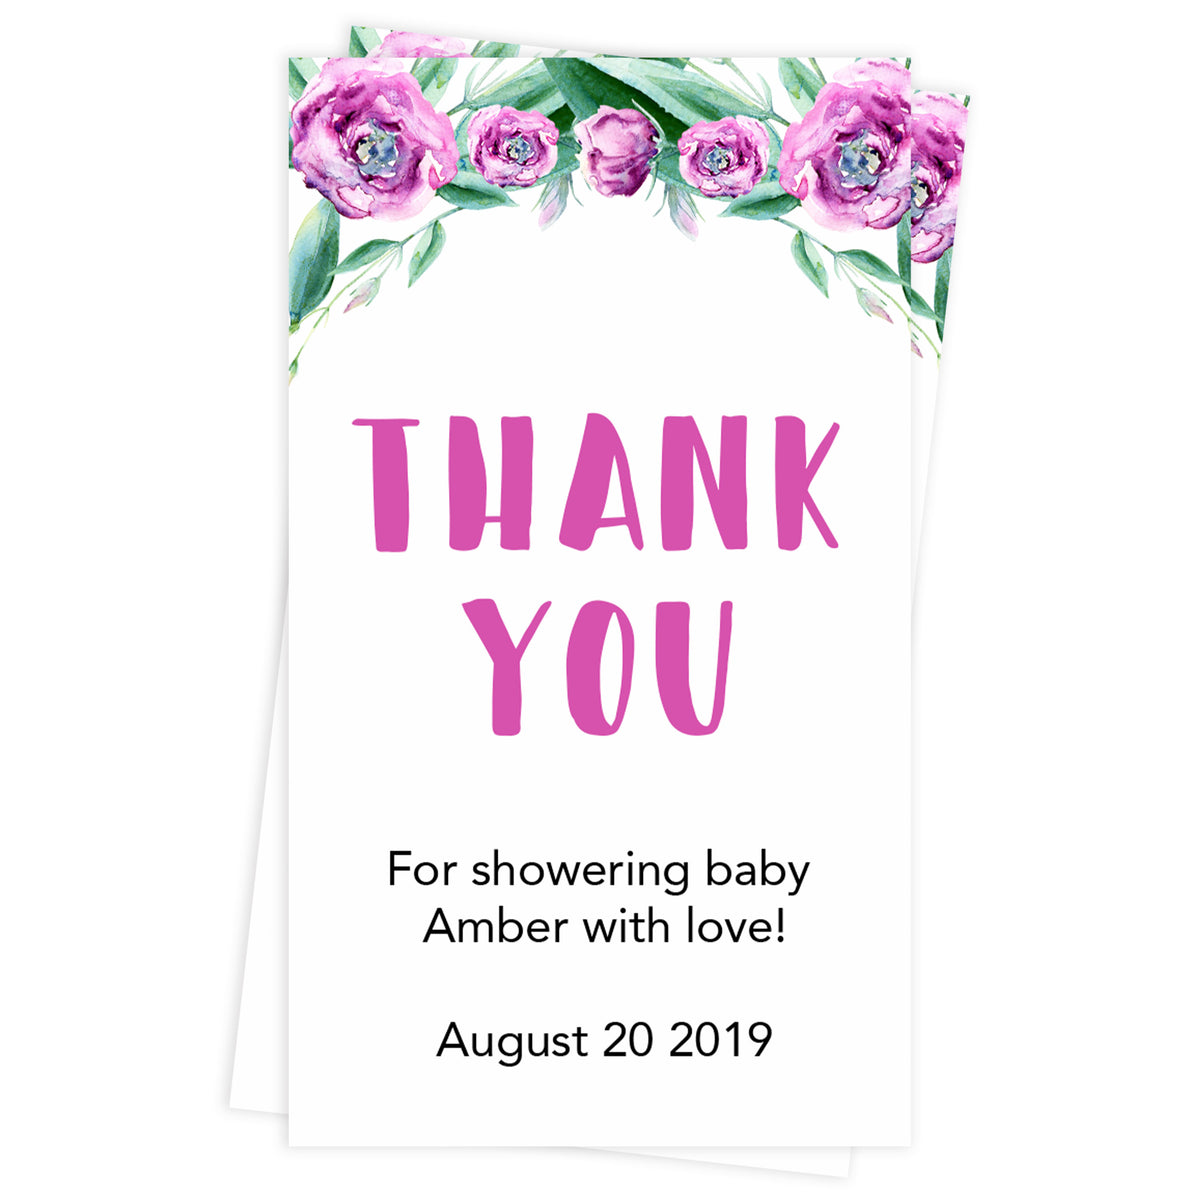 baby thank you tags, printable baby thank you tags, editable baby thank you tags, purple peonies baby thank you tags, baby thank you tag ideas